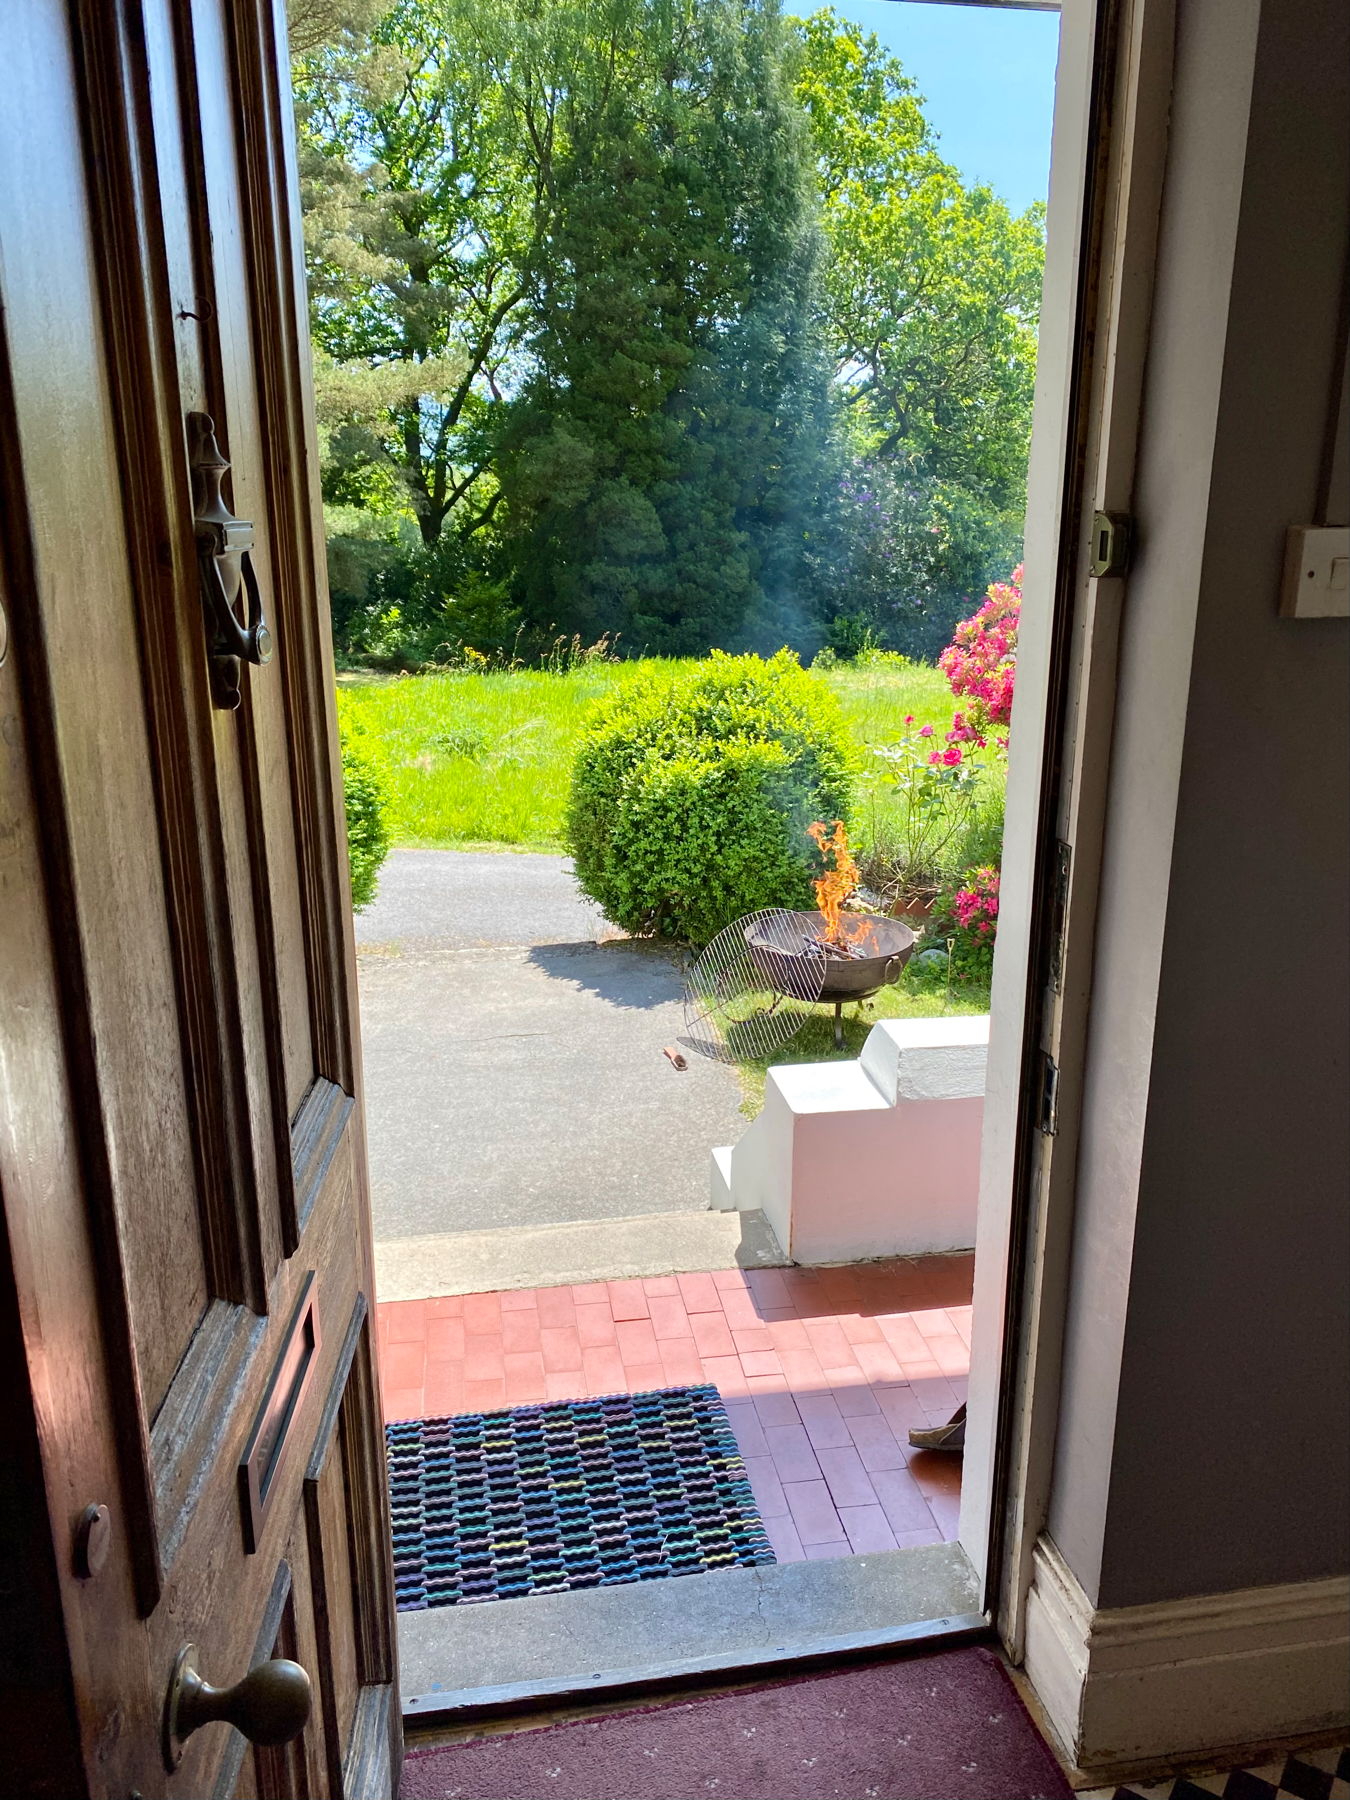 View from doorway of house looking into garden with a blazing metal fire pit and barbecue grill